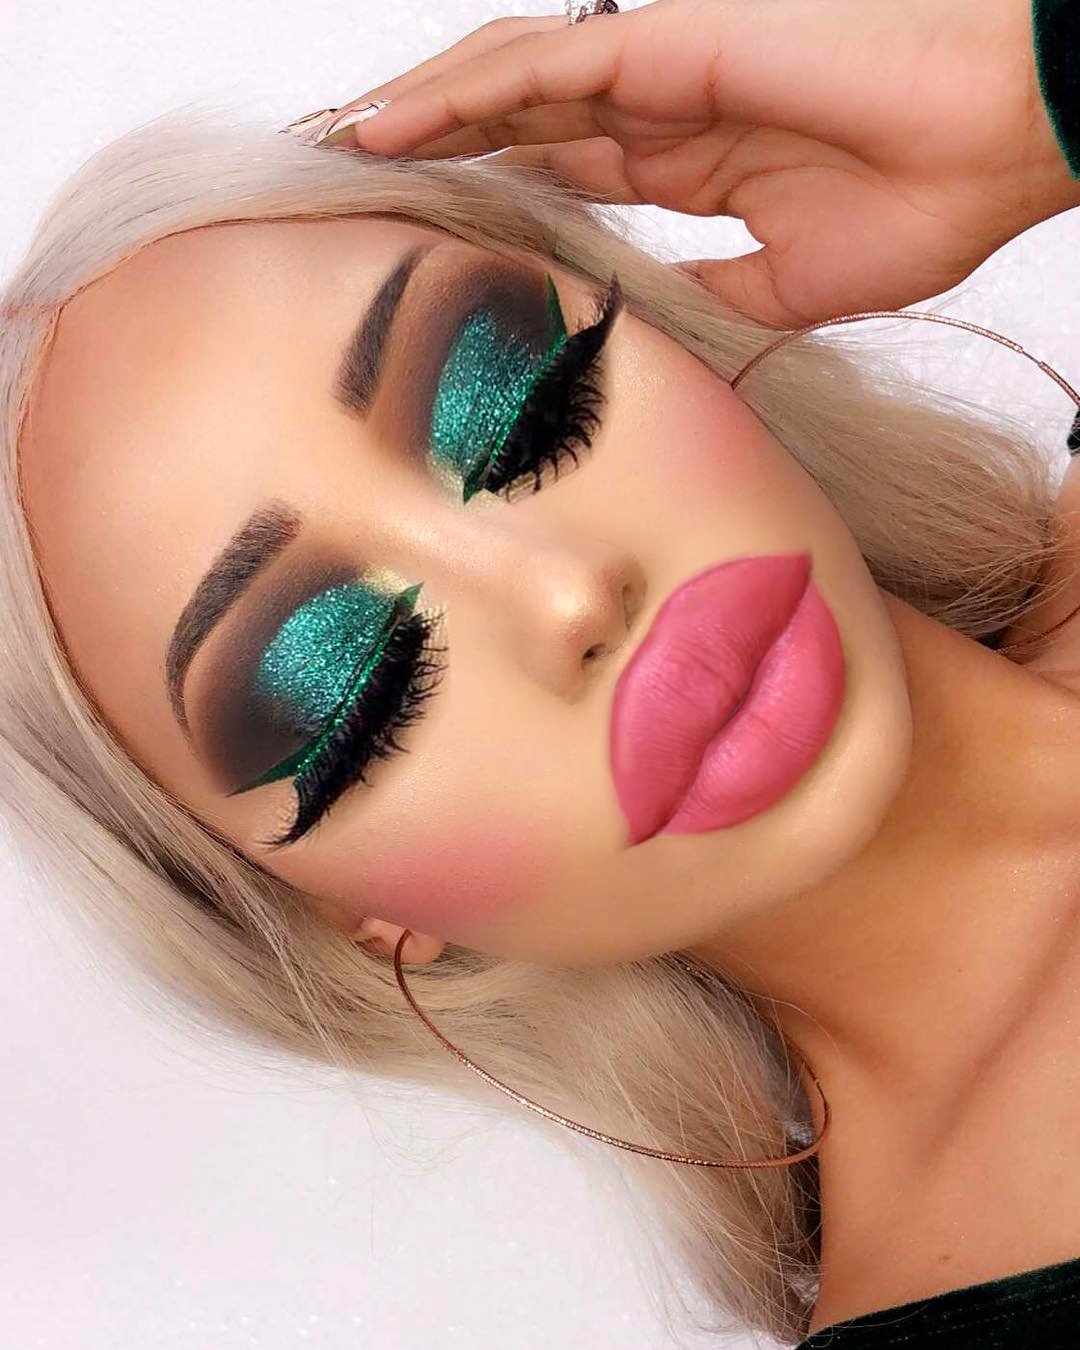 Photo by houblive1950 with the username @houblive1950,  February 12, 2019 at 7:00 PM and the text says 'via  Gridllr.com   —  gridll your Tumblr Likes! #lips  #full  #lips  #big  #lips  #fillers  #sexy  #lips  #human  #bratz  #Bratz  #bimbo  #bimbofied  #bimbofication  #sexy  #face  #perfect  #face  #lip  #goals  #lipgoals  #plasticpositive  #plastic..'